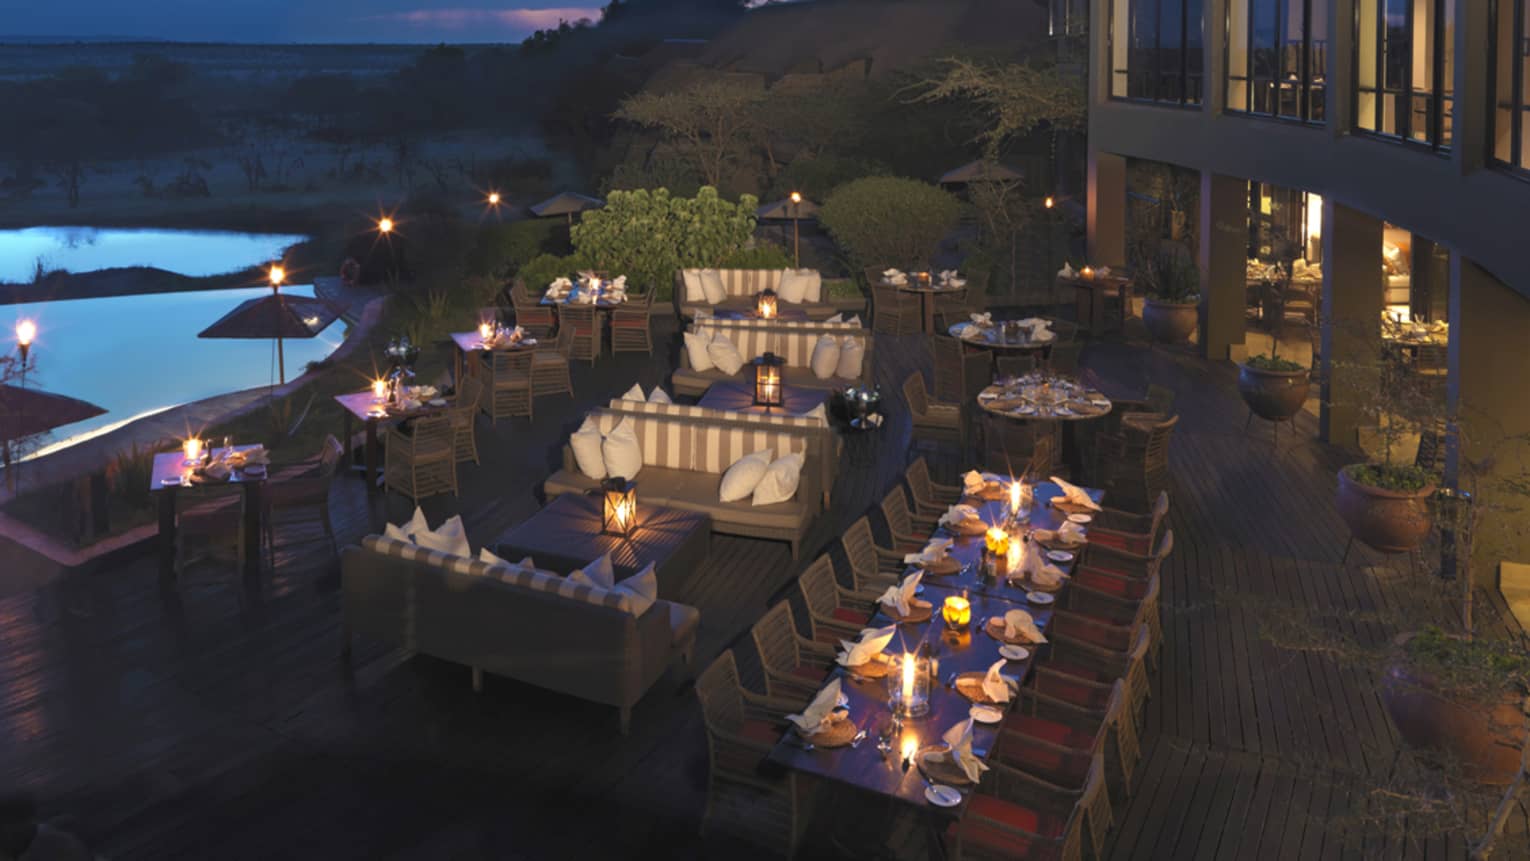 Glowing candles on patio dining tables near blue outdoor swimming pool, sky